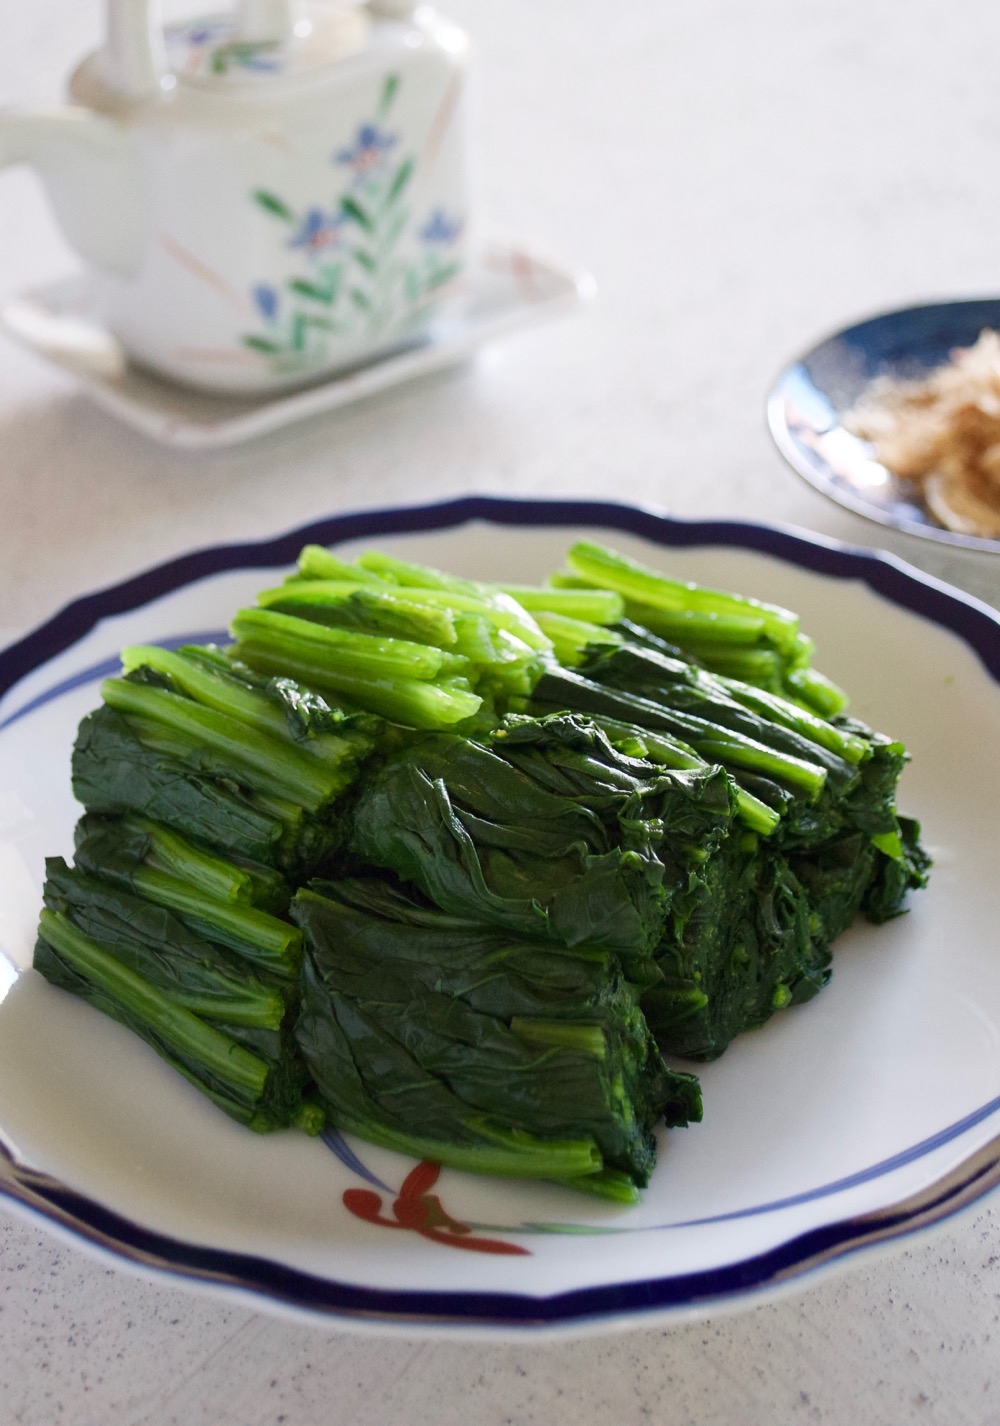 Spinach ohitashi salad is a very simple dish as a side or substitute for salad. Simply boil and serve with bonito flakes topping, or sesame seeds if vegetarian.